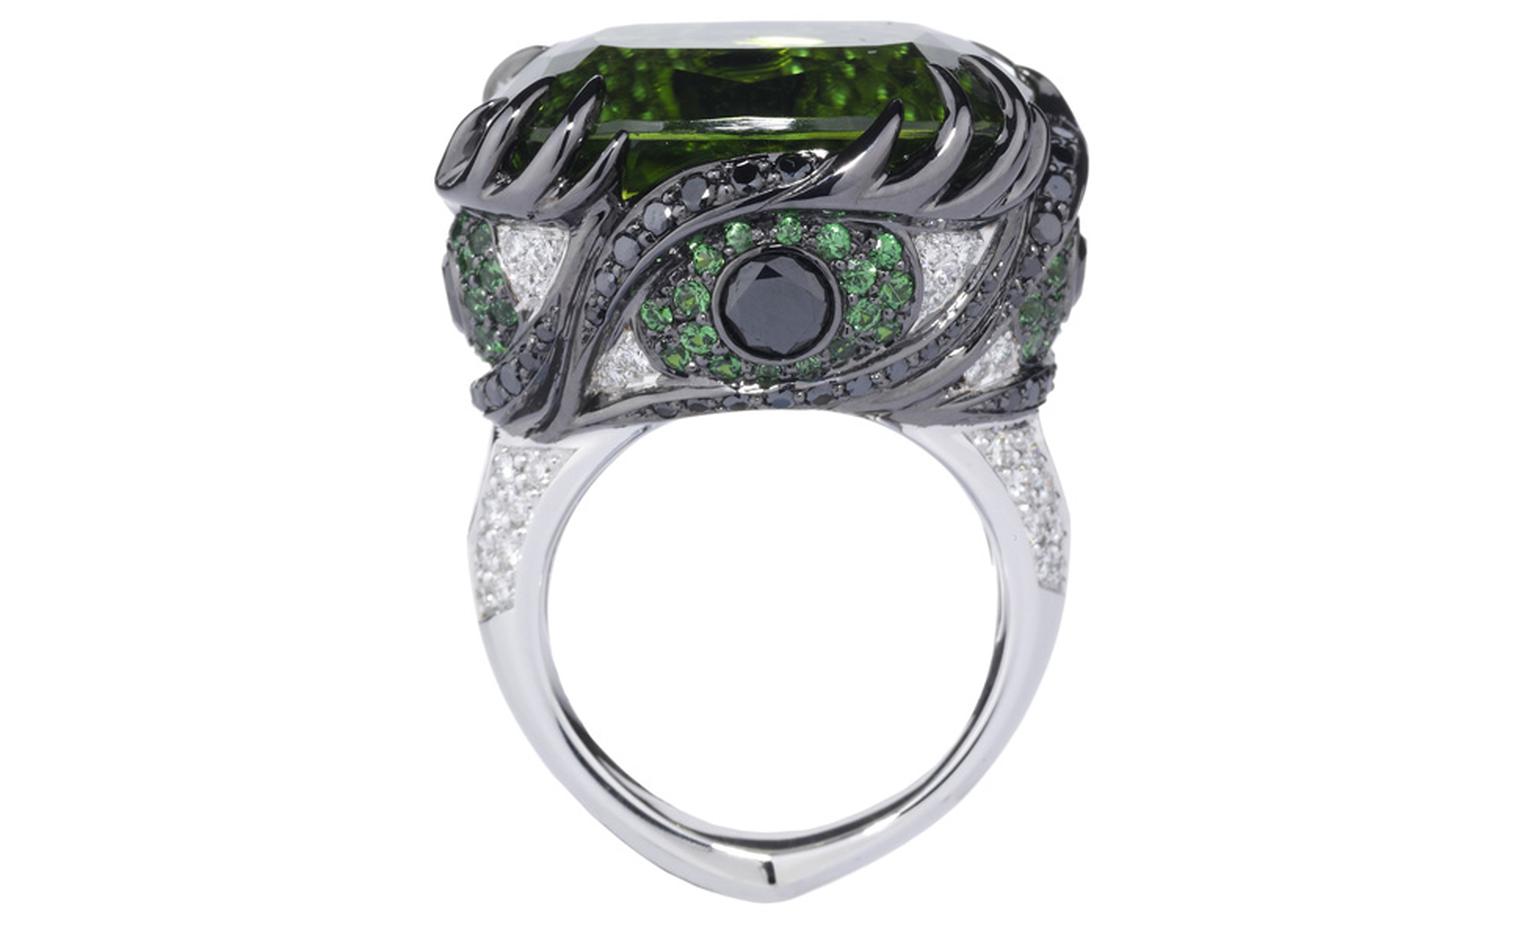 Stephen Webster Seven Deadly Sins Envy ring - of course this one had to be green